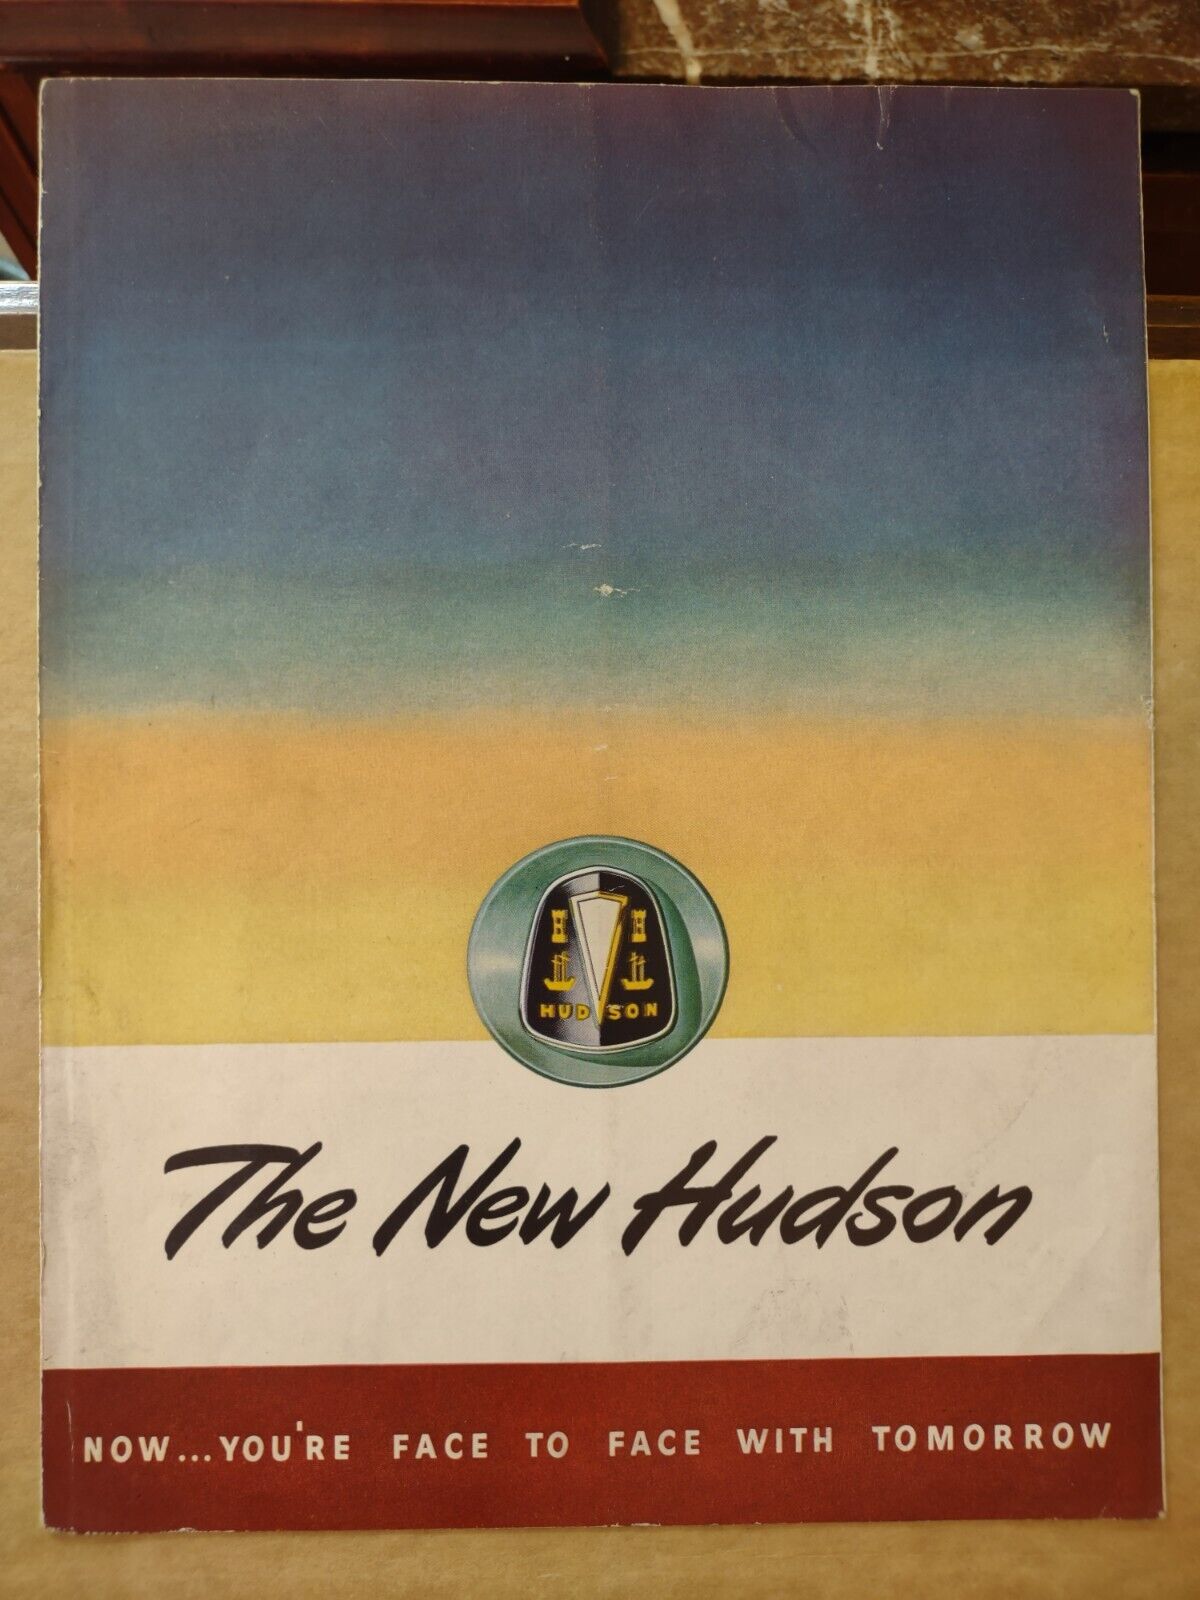 1940s Hudson Commodore / Super Series 32 X 11 Fold Out Auto Advertising Brochure